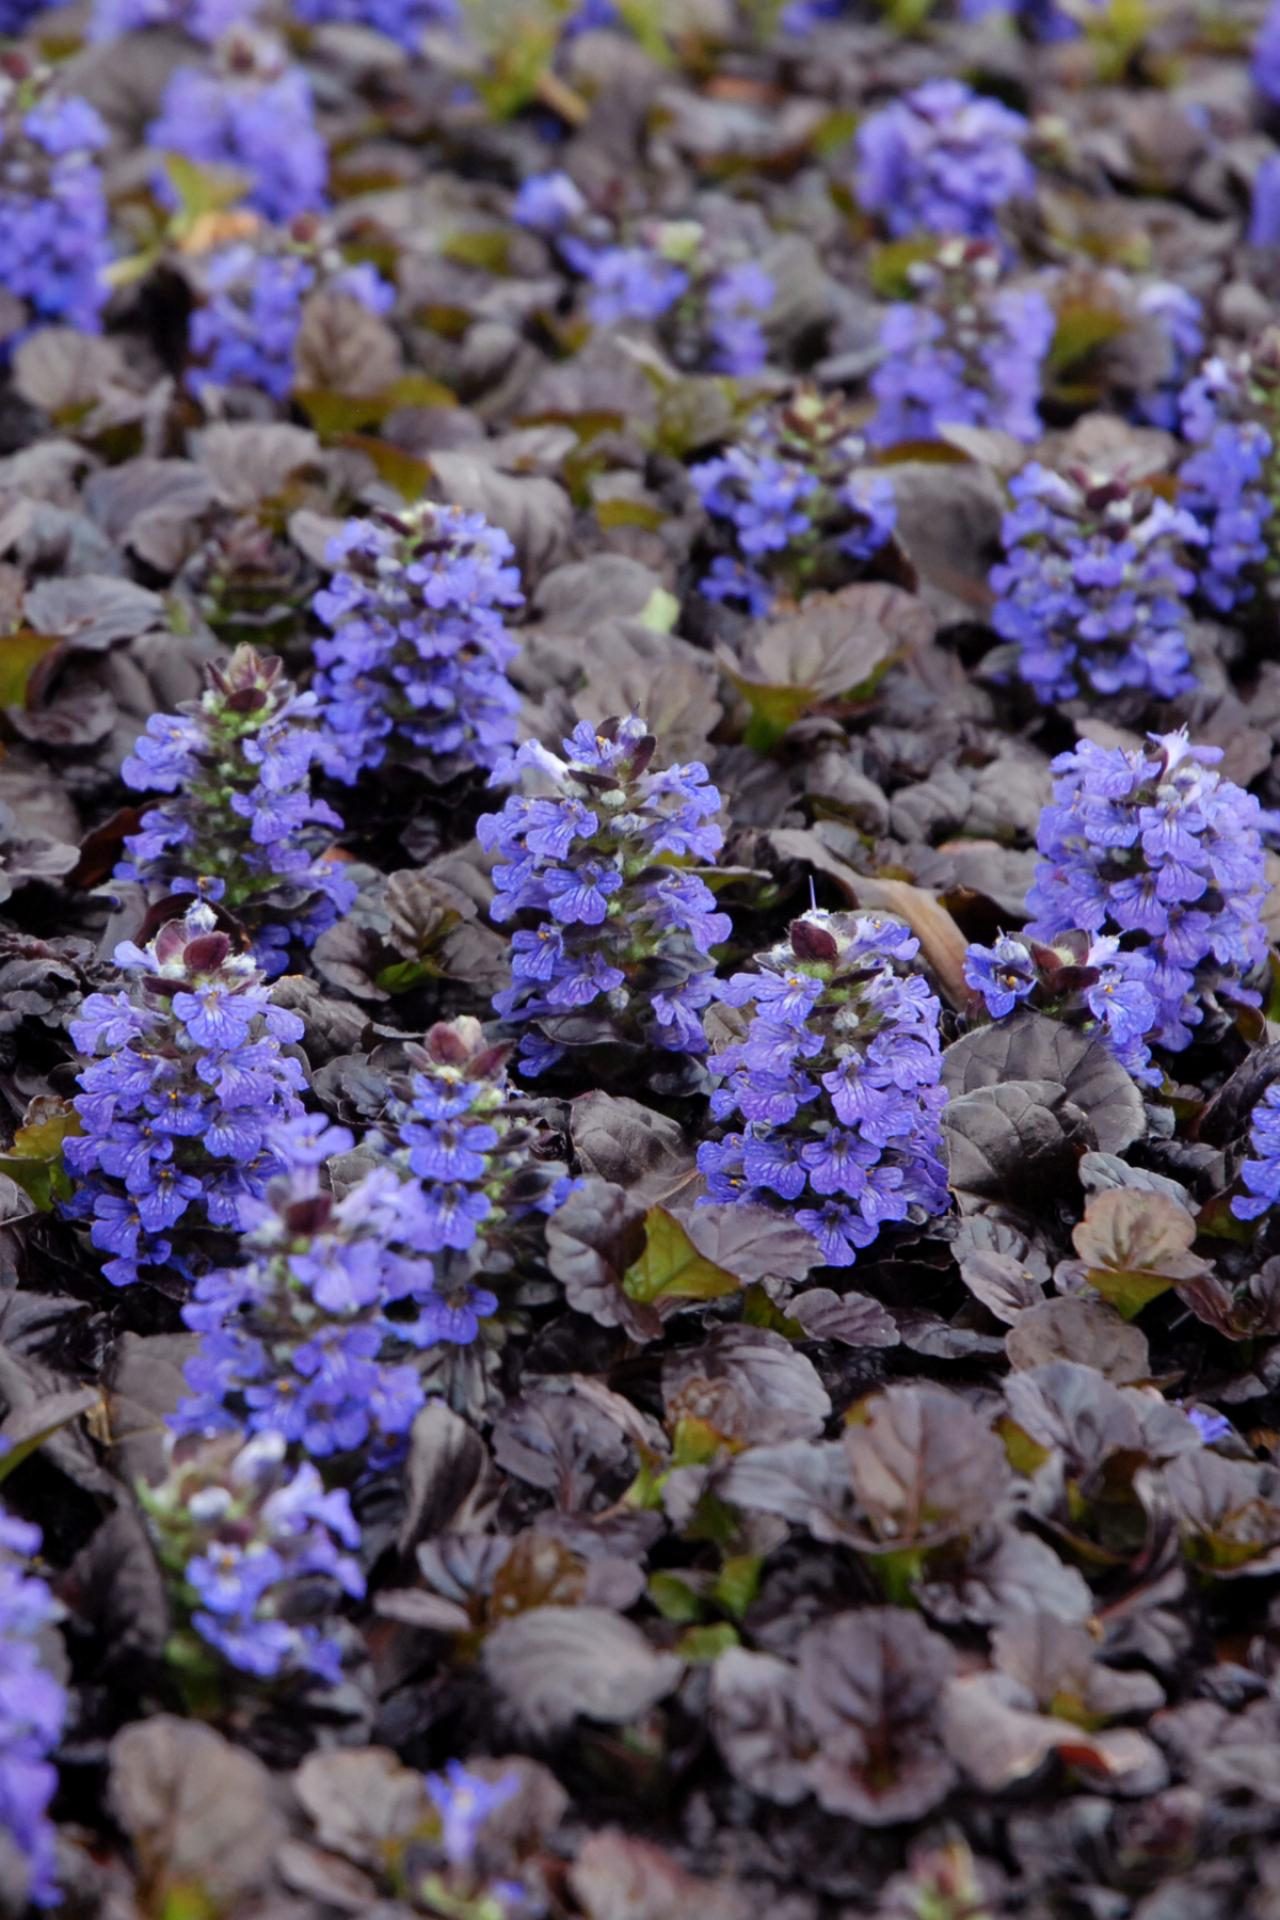 Bugleweed A Perennial Groundcover That, Ground Cover Plant With Blue Flower Spikes